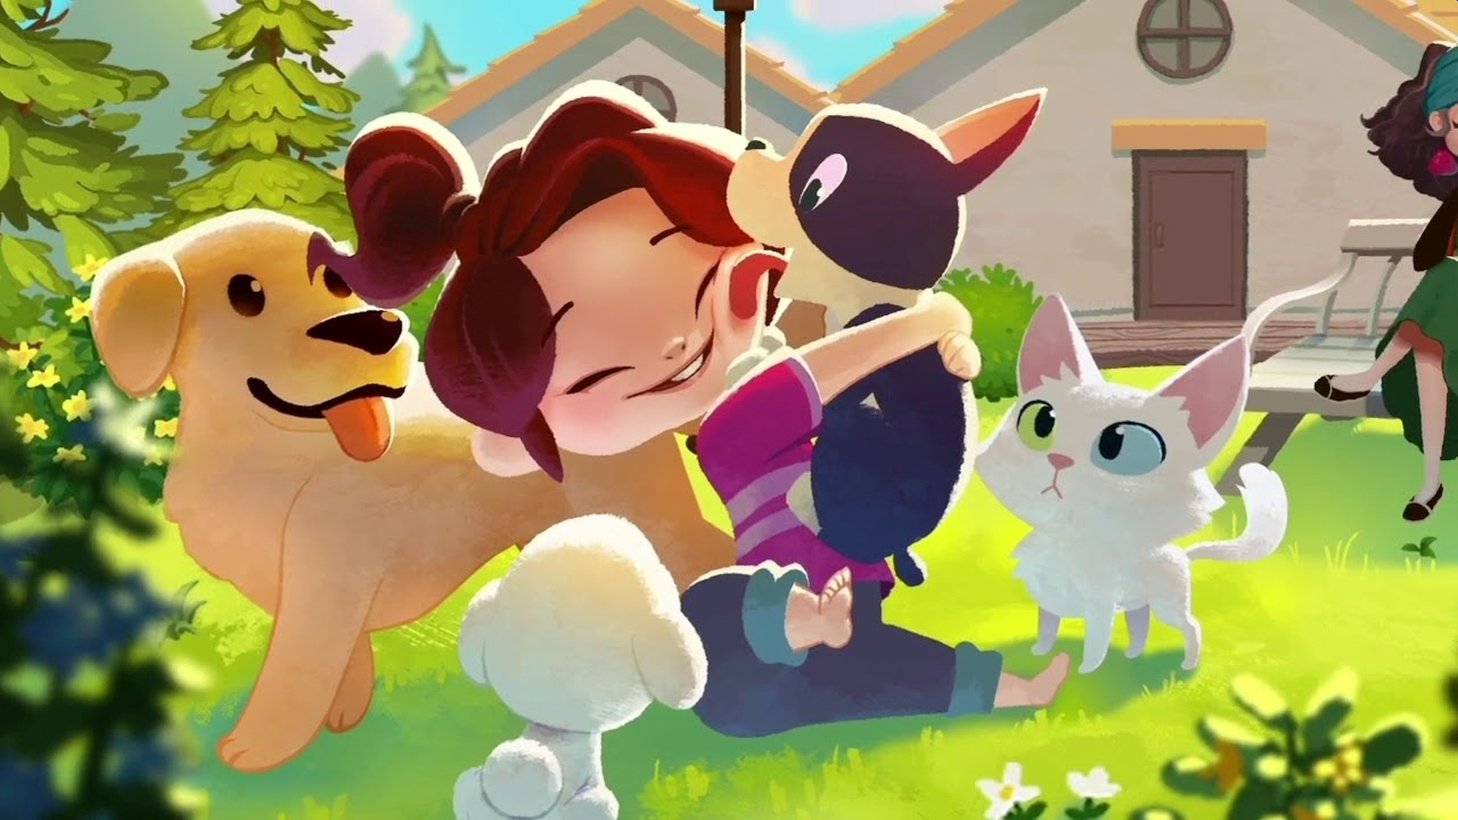 Casual Time Management Mobile Game Hellopet House Available Now